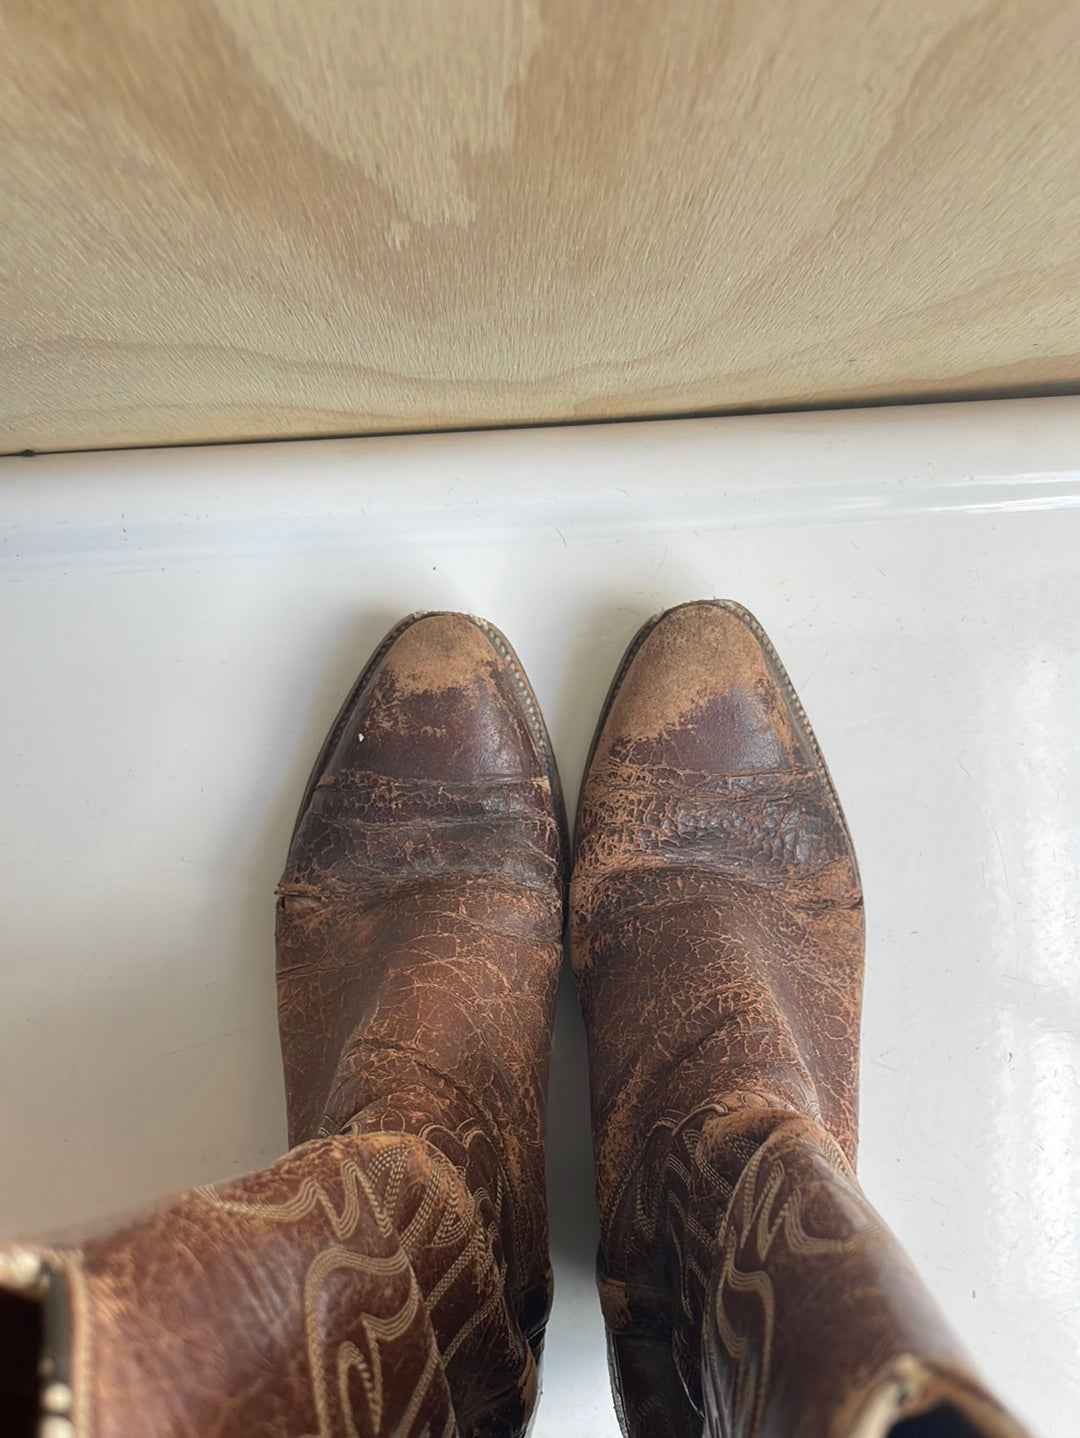 Vintage Lucchese Brown Boots